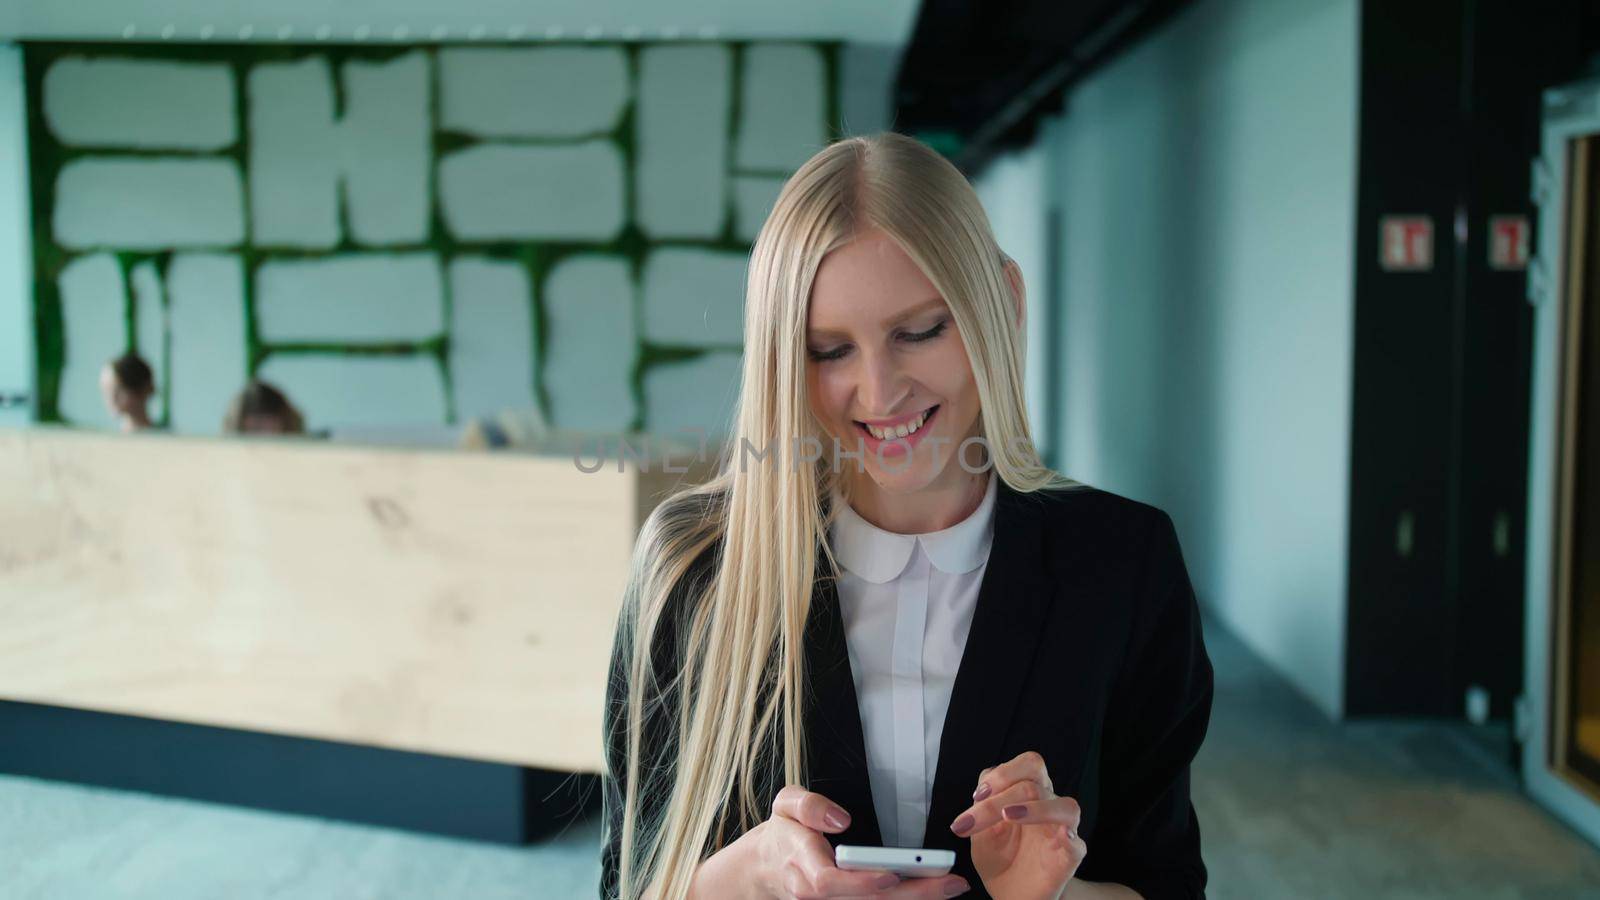 Cheerful young woman with phone in office. Pretty blond woman with long hair wearing elegant black suit and smiling charmingly at camera inside of modern office. by art24pro